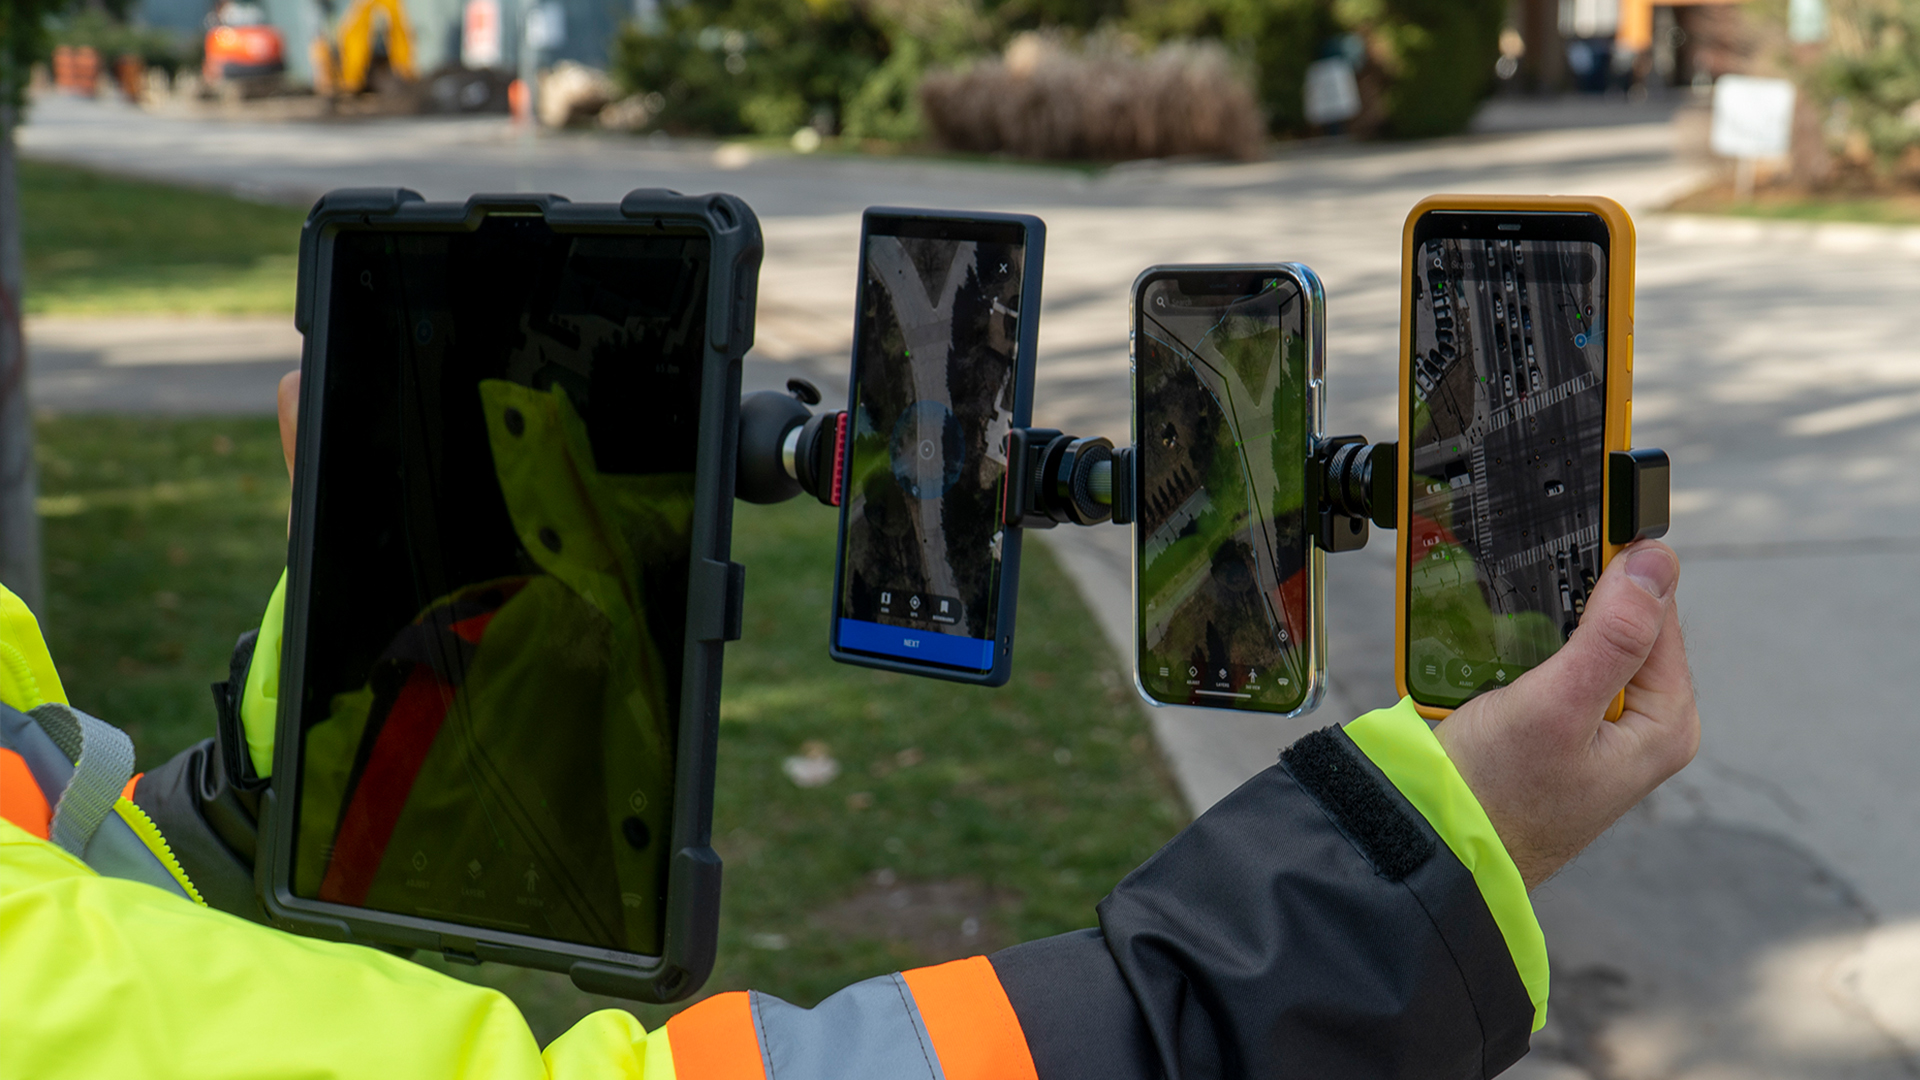 iPhone and iPad LiDAR spatial tracking capabilities: second test